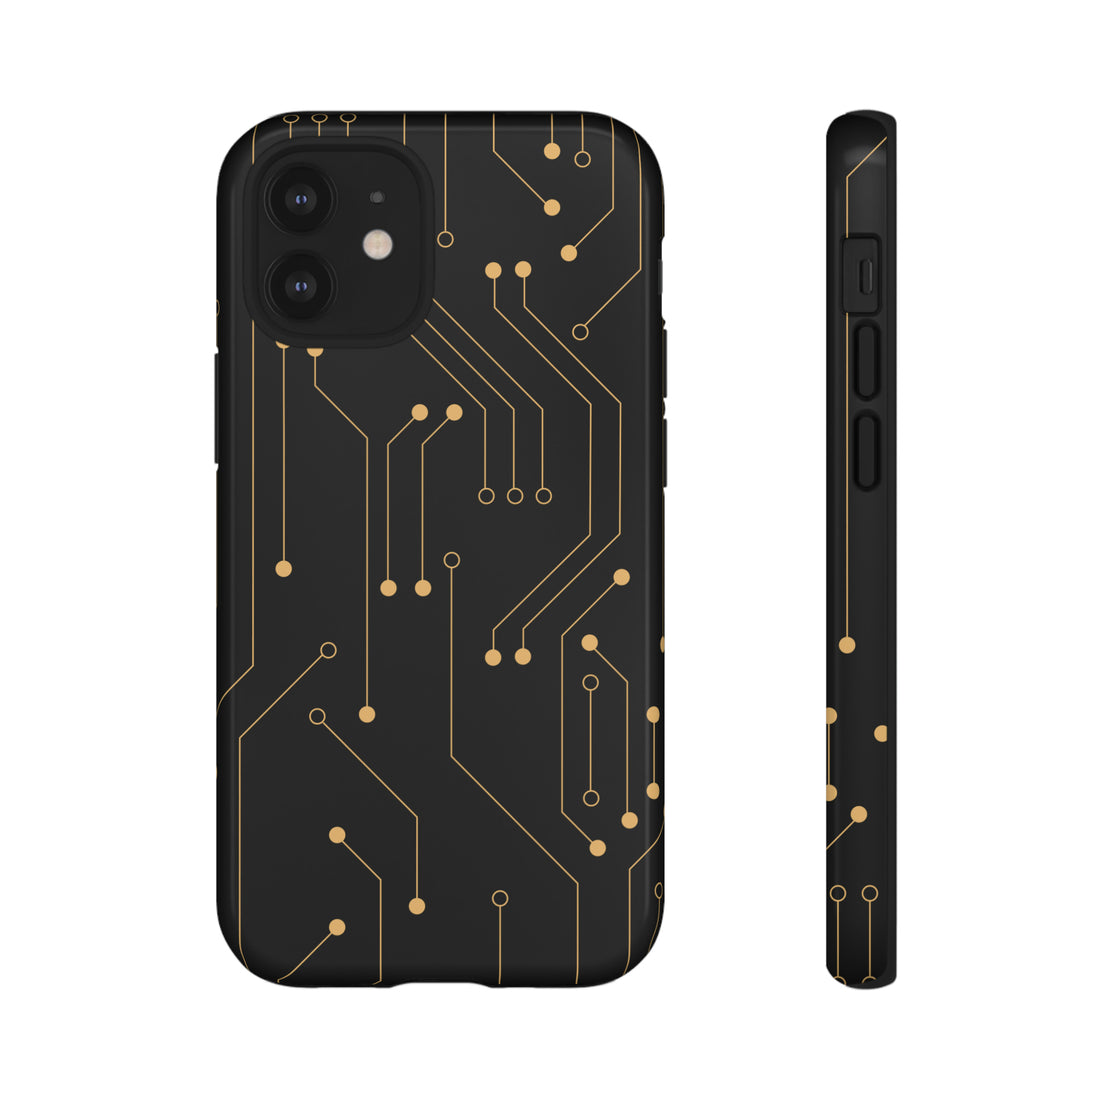 Circuitry Elegance: Metallic Gold on Matte Black Abstract PCB Lines Design